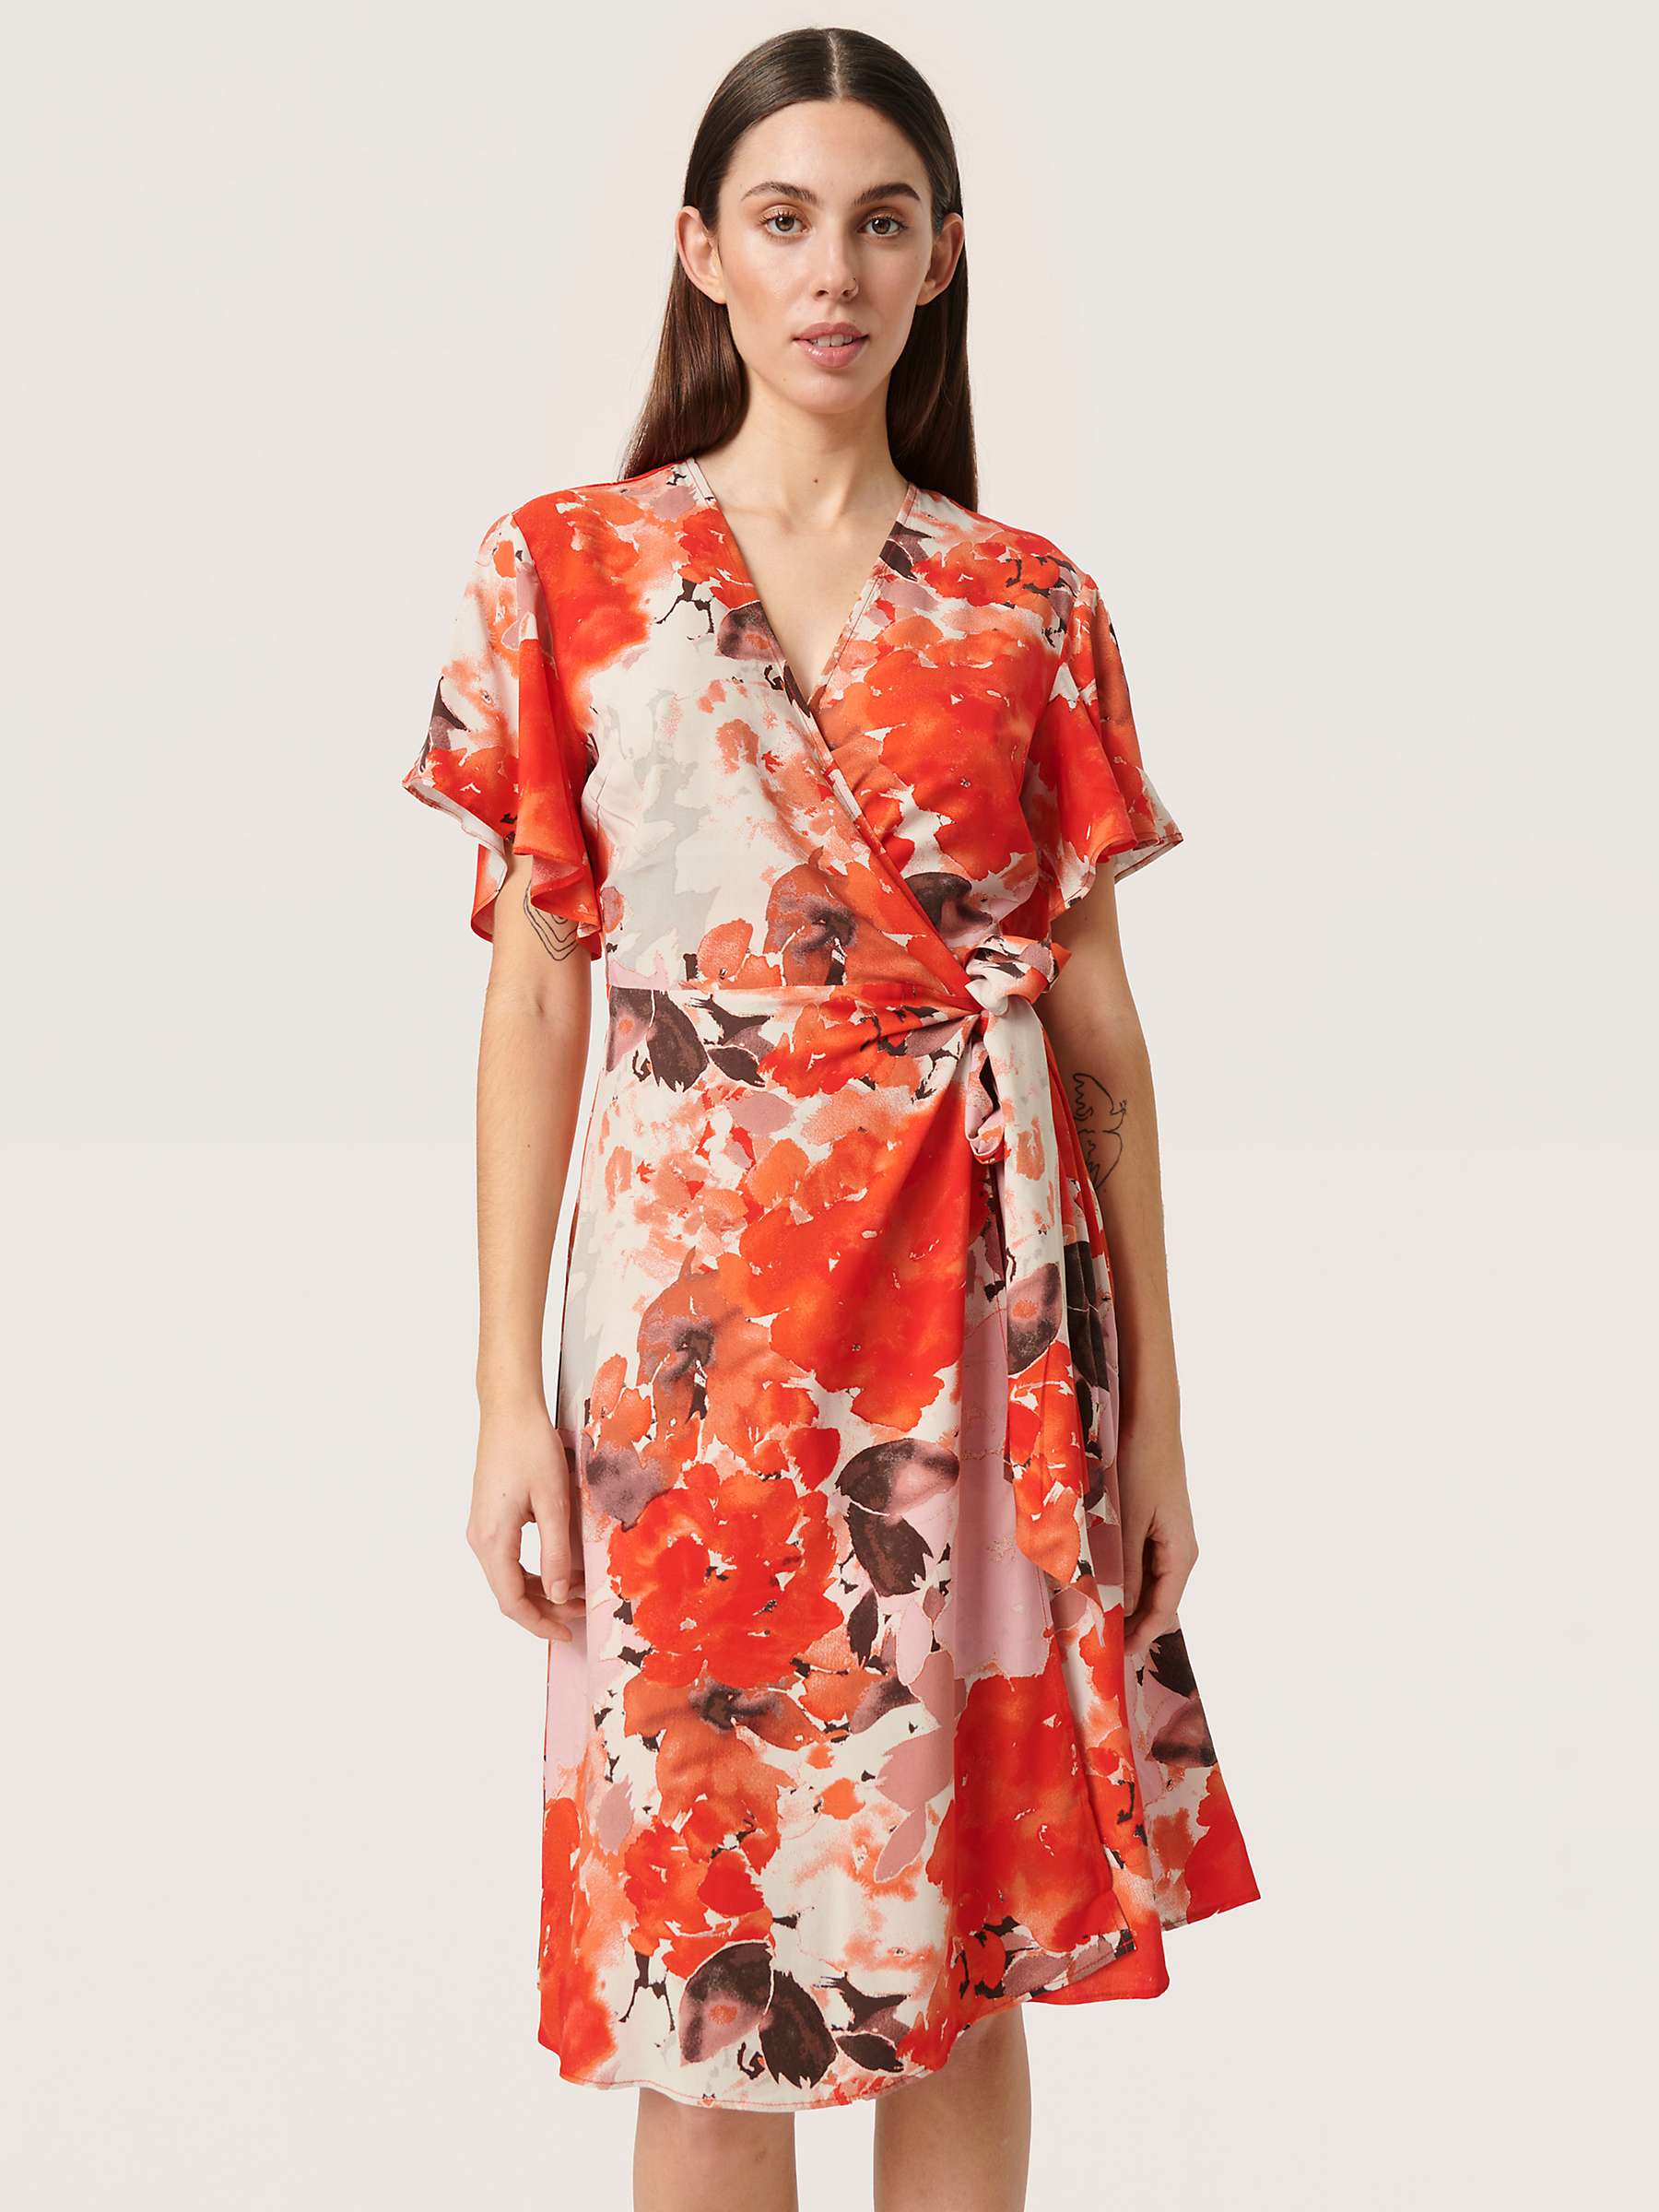 Buy Soaked In Luxury Indre Gaby Floral Print Dress, Red Online at johnlewis.com